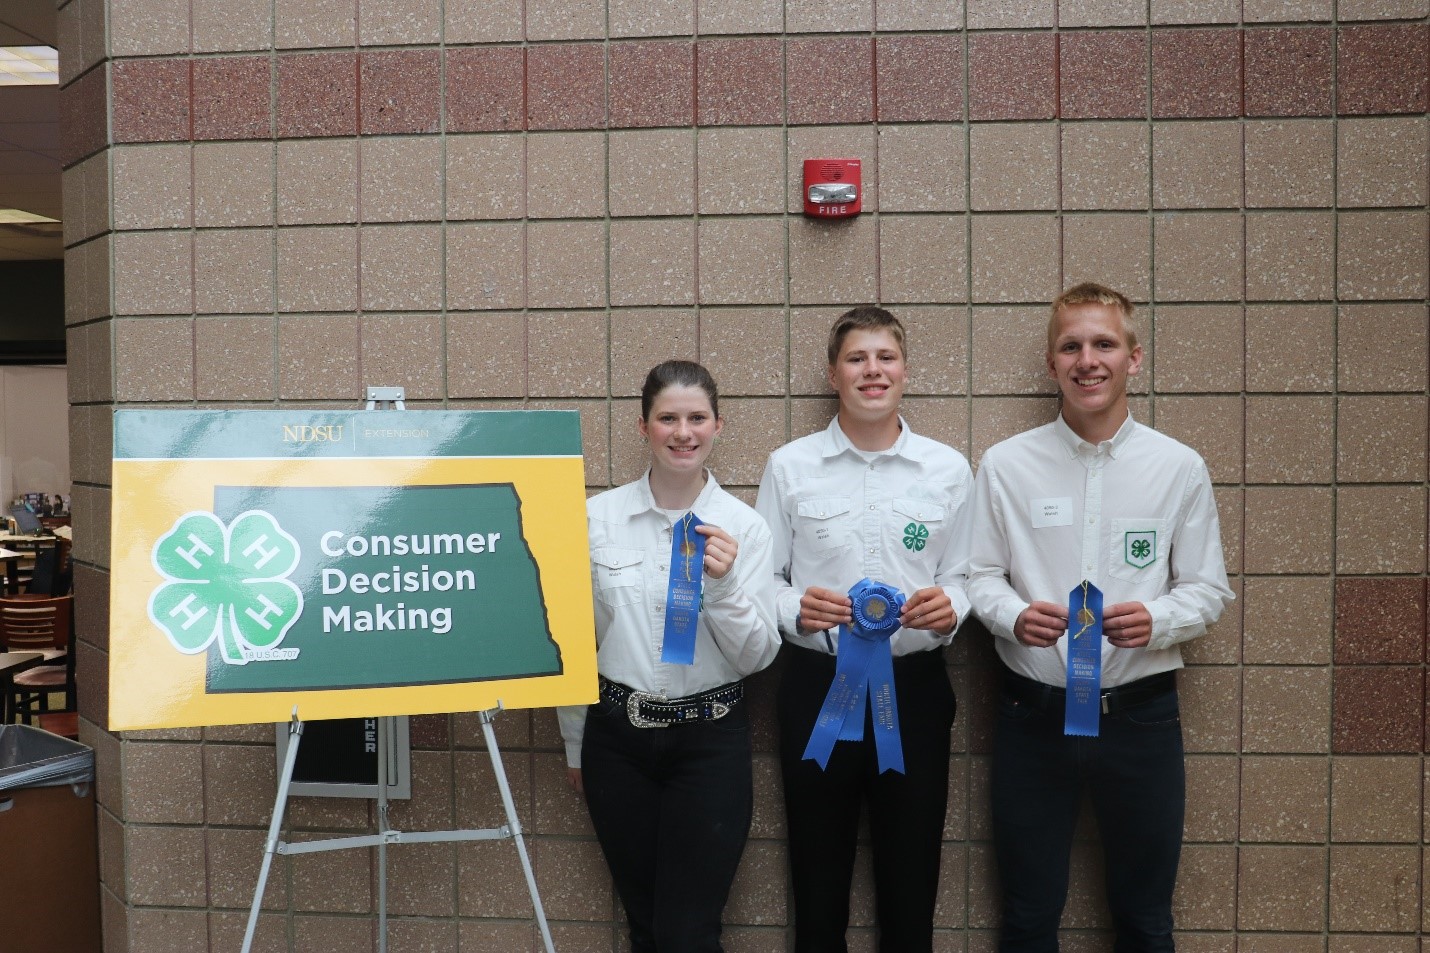 Walsh County placed first in the senior 4-H Consumer Decision Making contest. Team members are (L to R) Hannah Myrdal, Andrew Myrdal and Owen Zikmund. (NDSU photo)